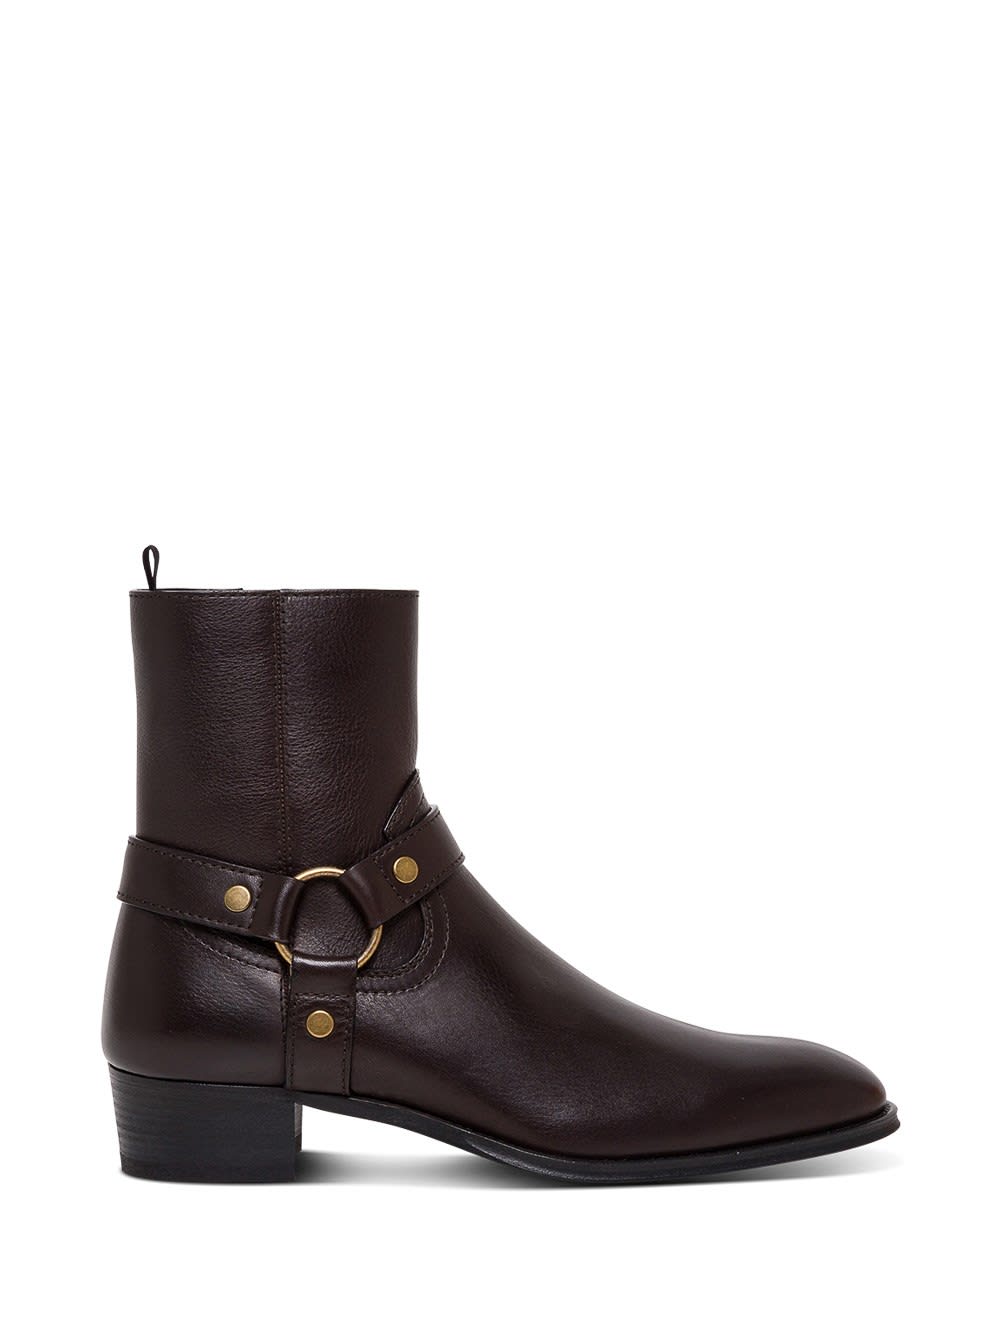 Saint Laurent Wyatt Ankle Boots In Brown Leather